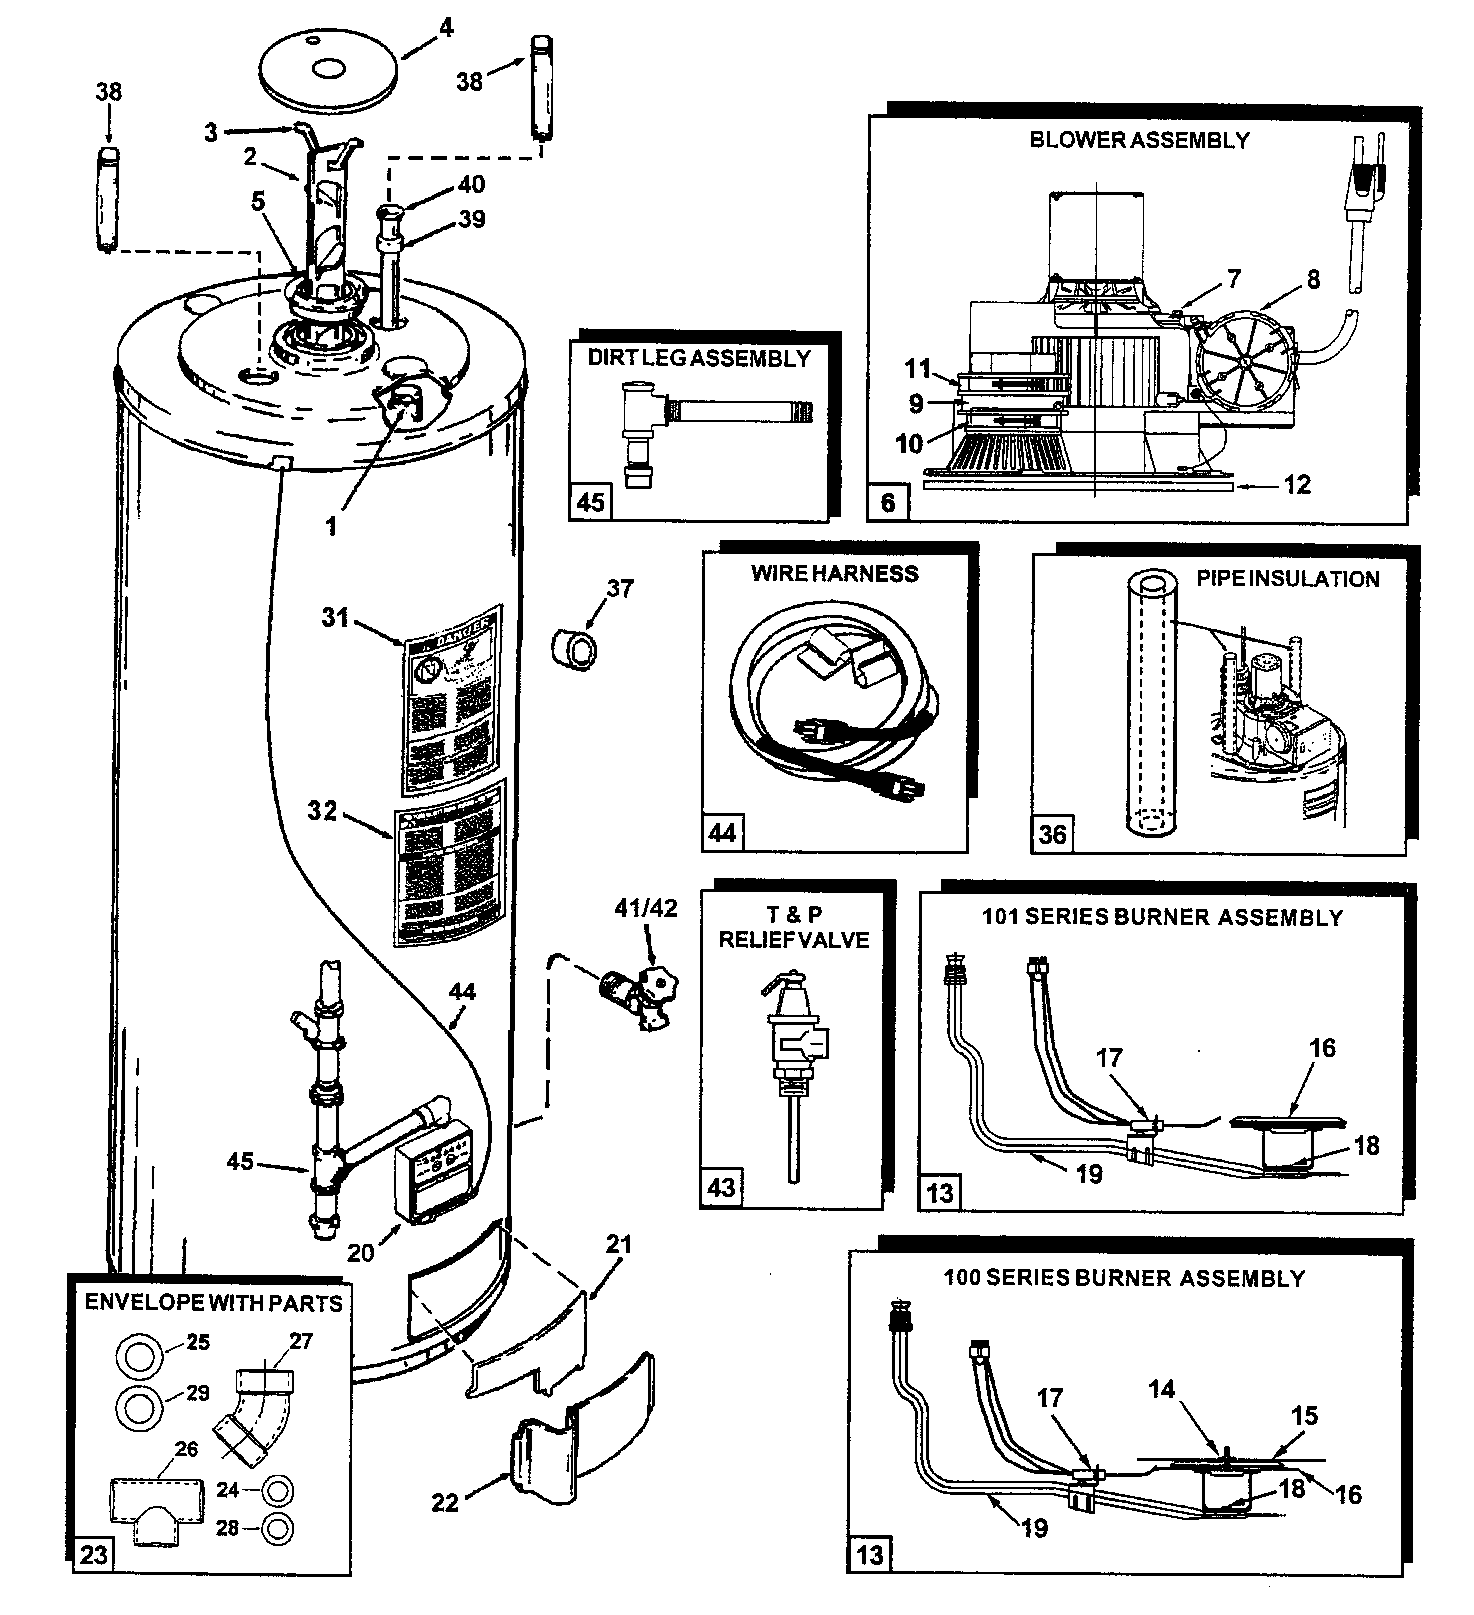 Rheem Electric Water Heater Wiring Diagram from c.searspartsdirect.com